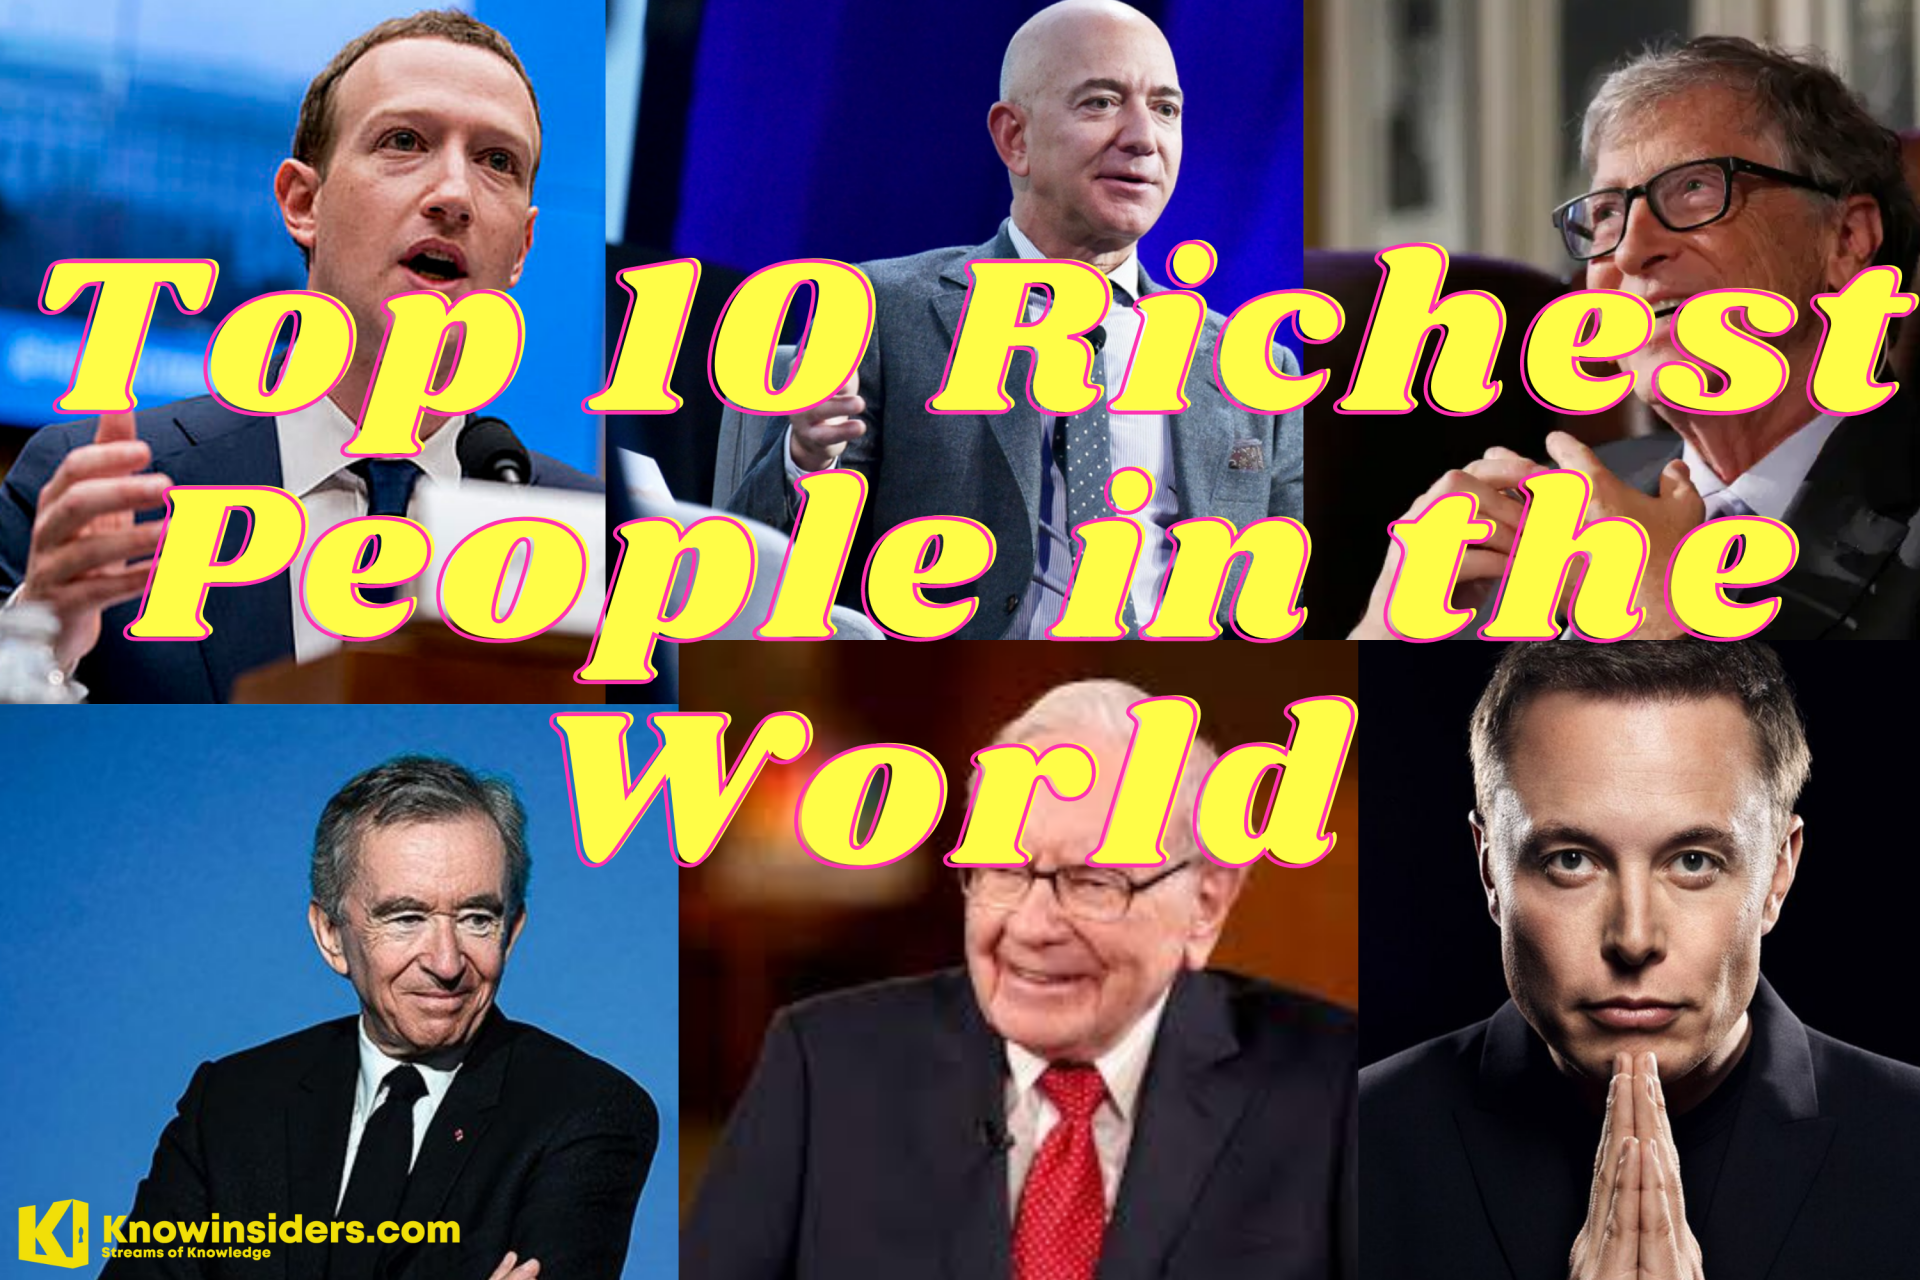 Top 10 Richest People in the World - A View to Their Net Worth